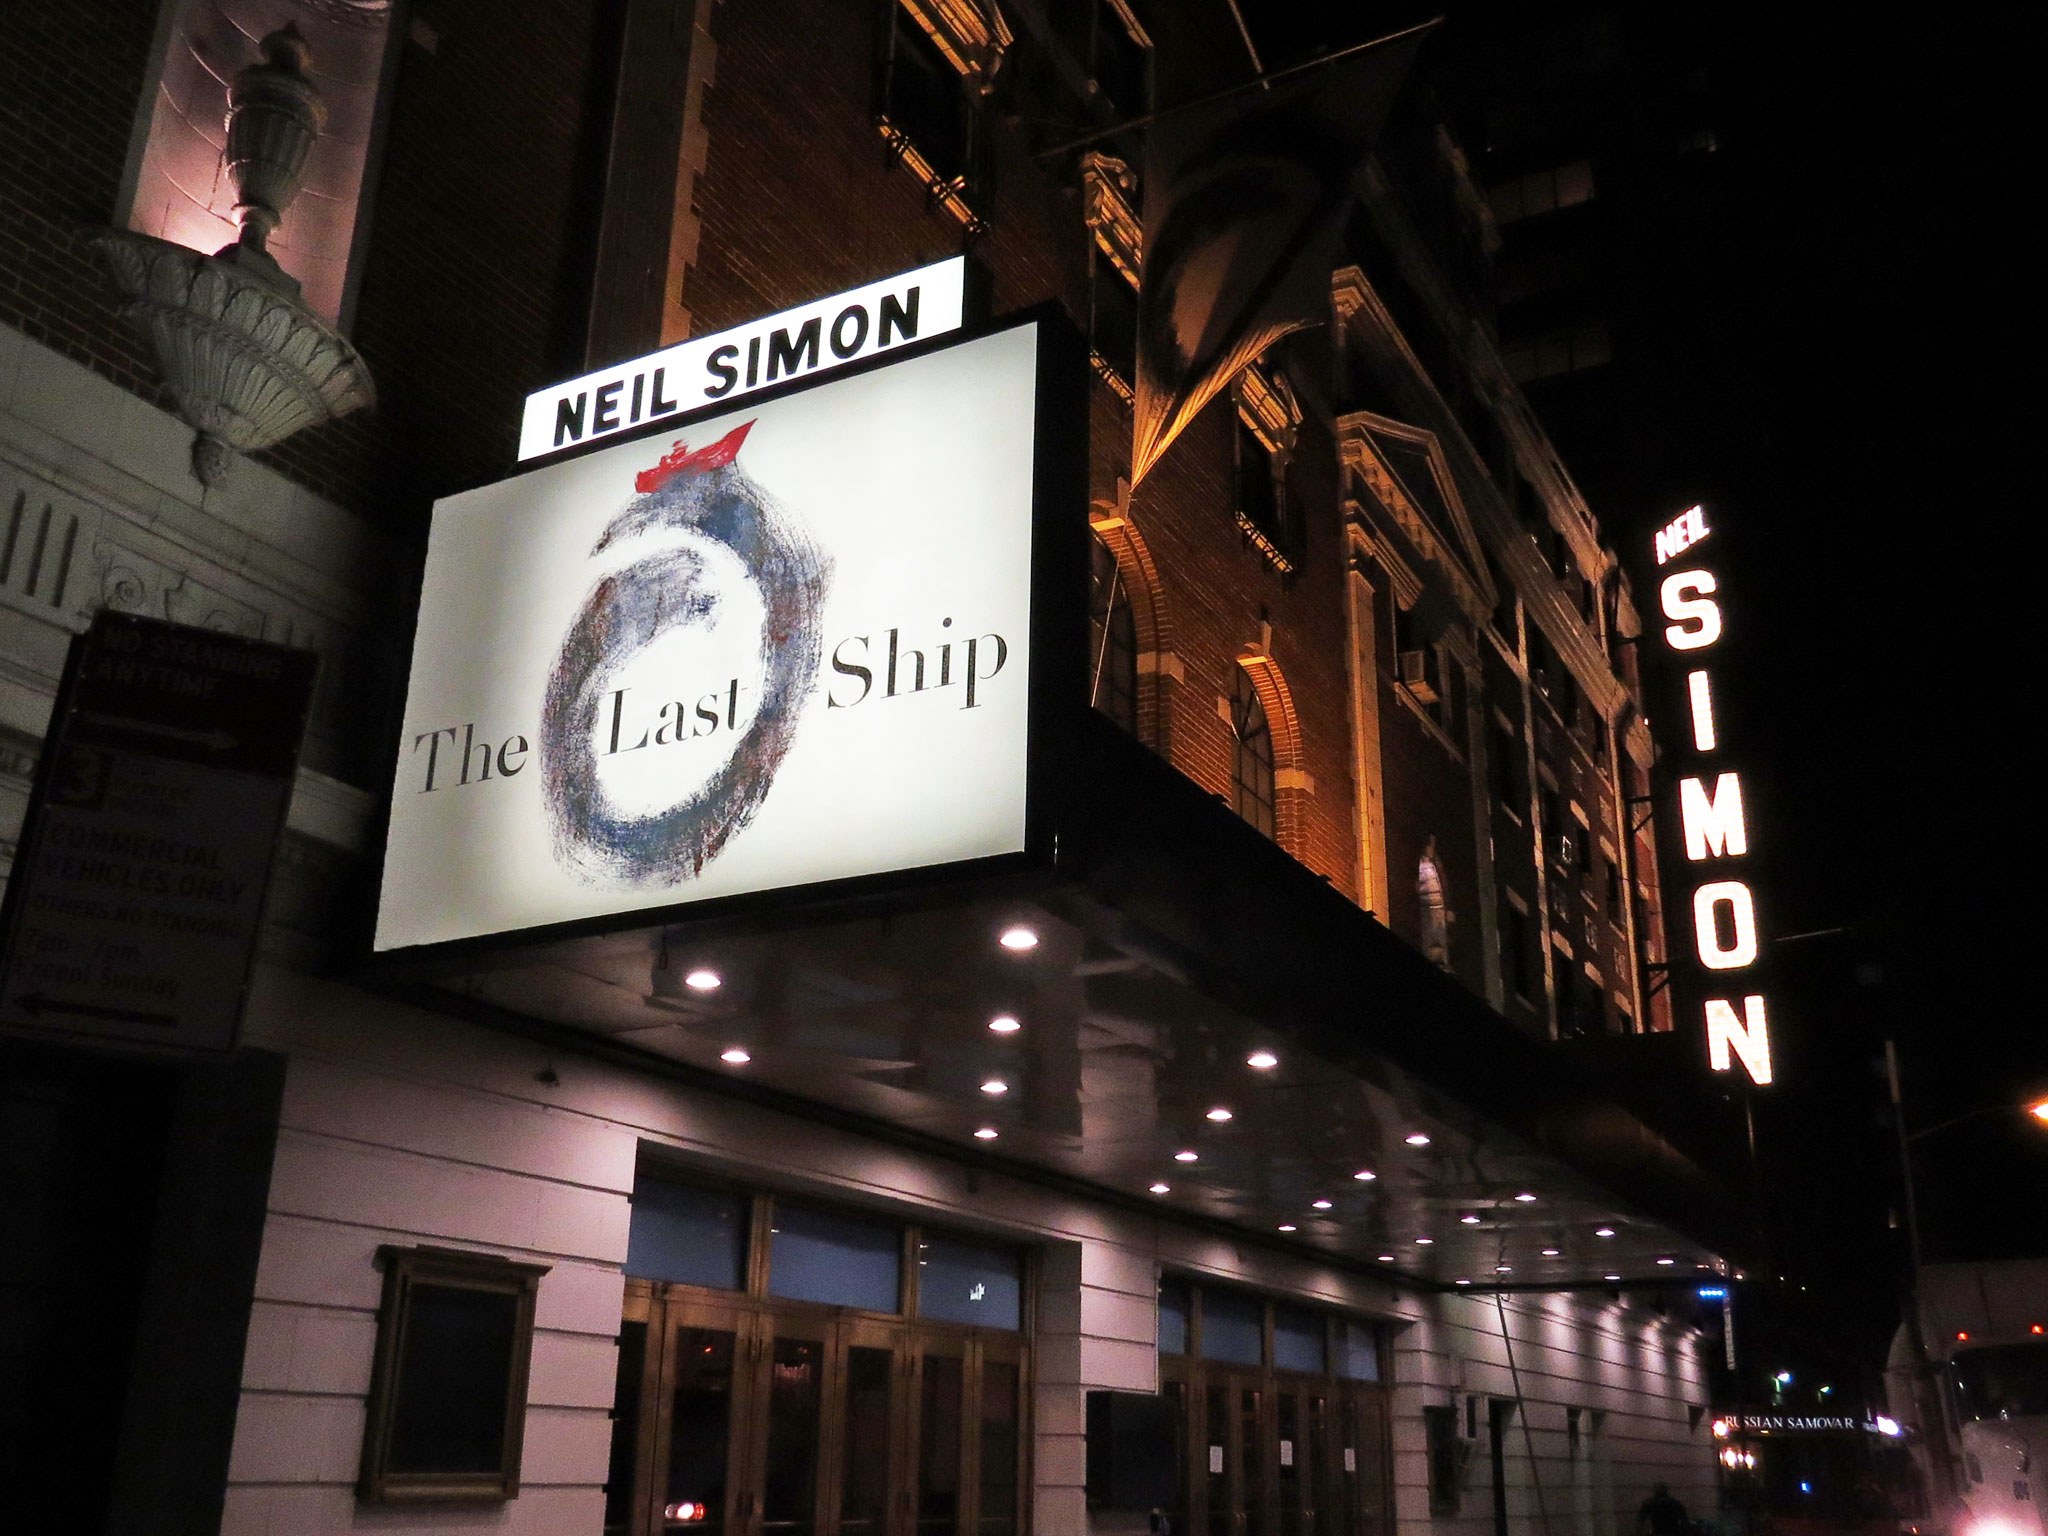 The Last Ship Marquee